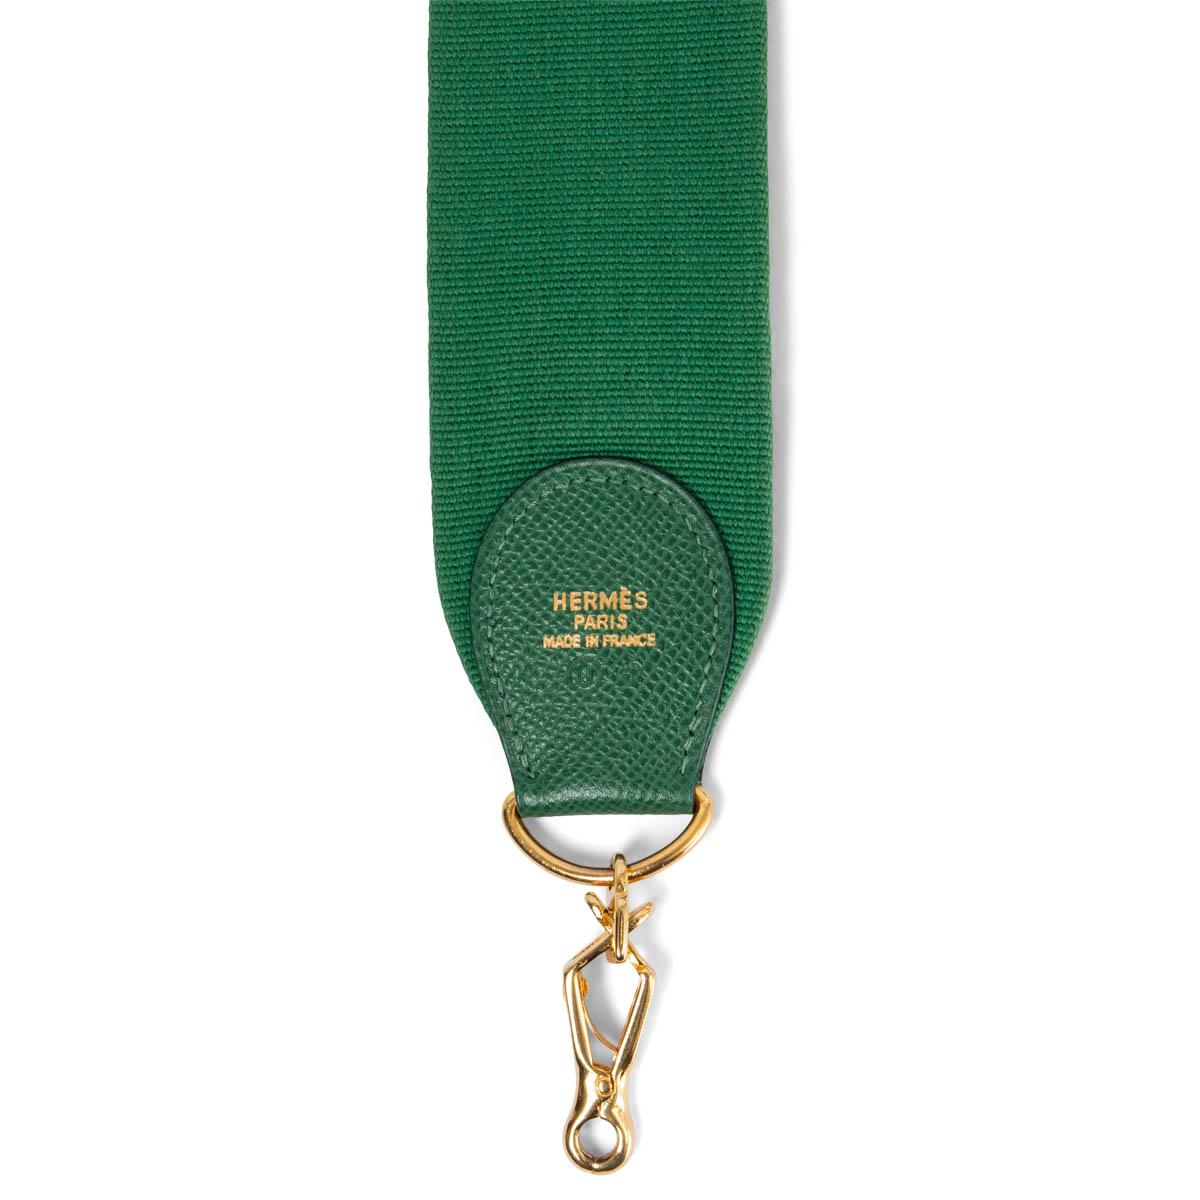 100% authentic Hermès shoulder strap for your Kelly or Evelyne bag in Vert green canvas and leather. Has been carried and is in excellent condition. 

Measurements
Width	5cm (2in)
Length	110cm (42.9in)
Hardware	Gold-Tone

All our listings include